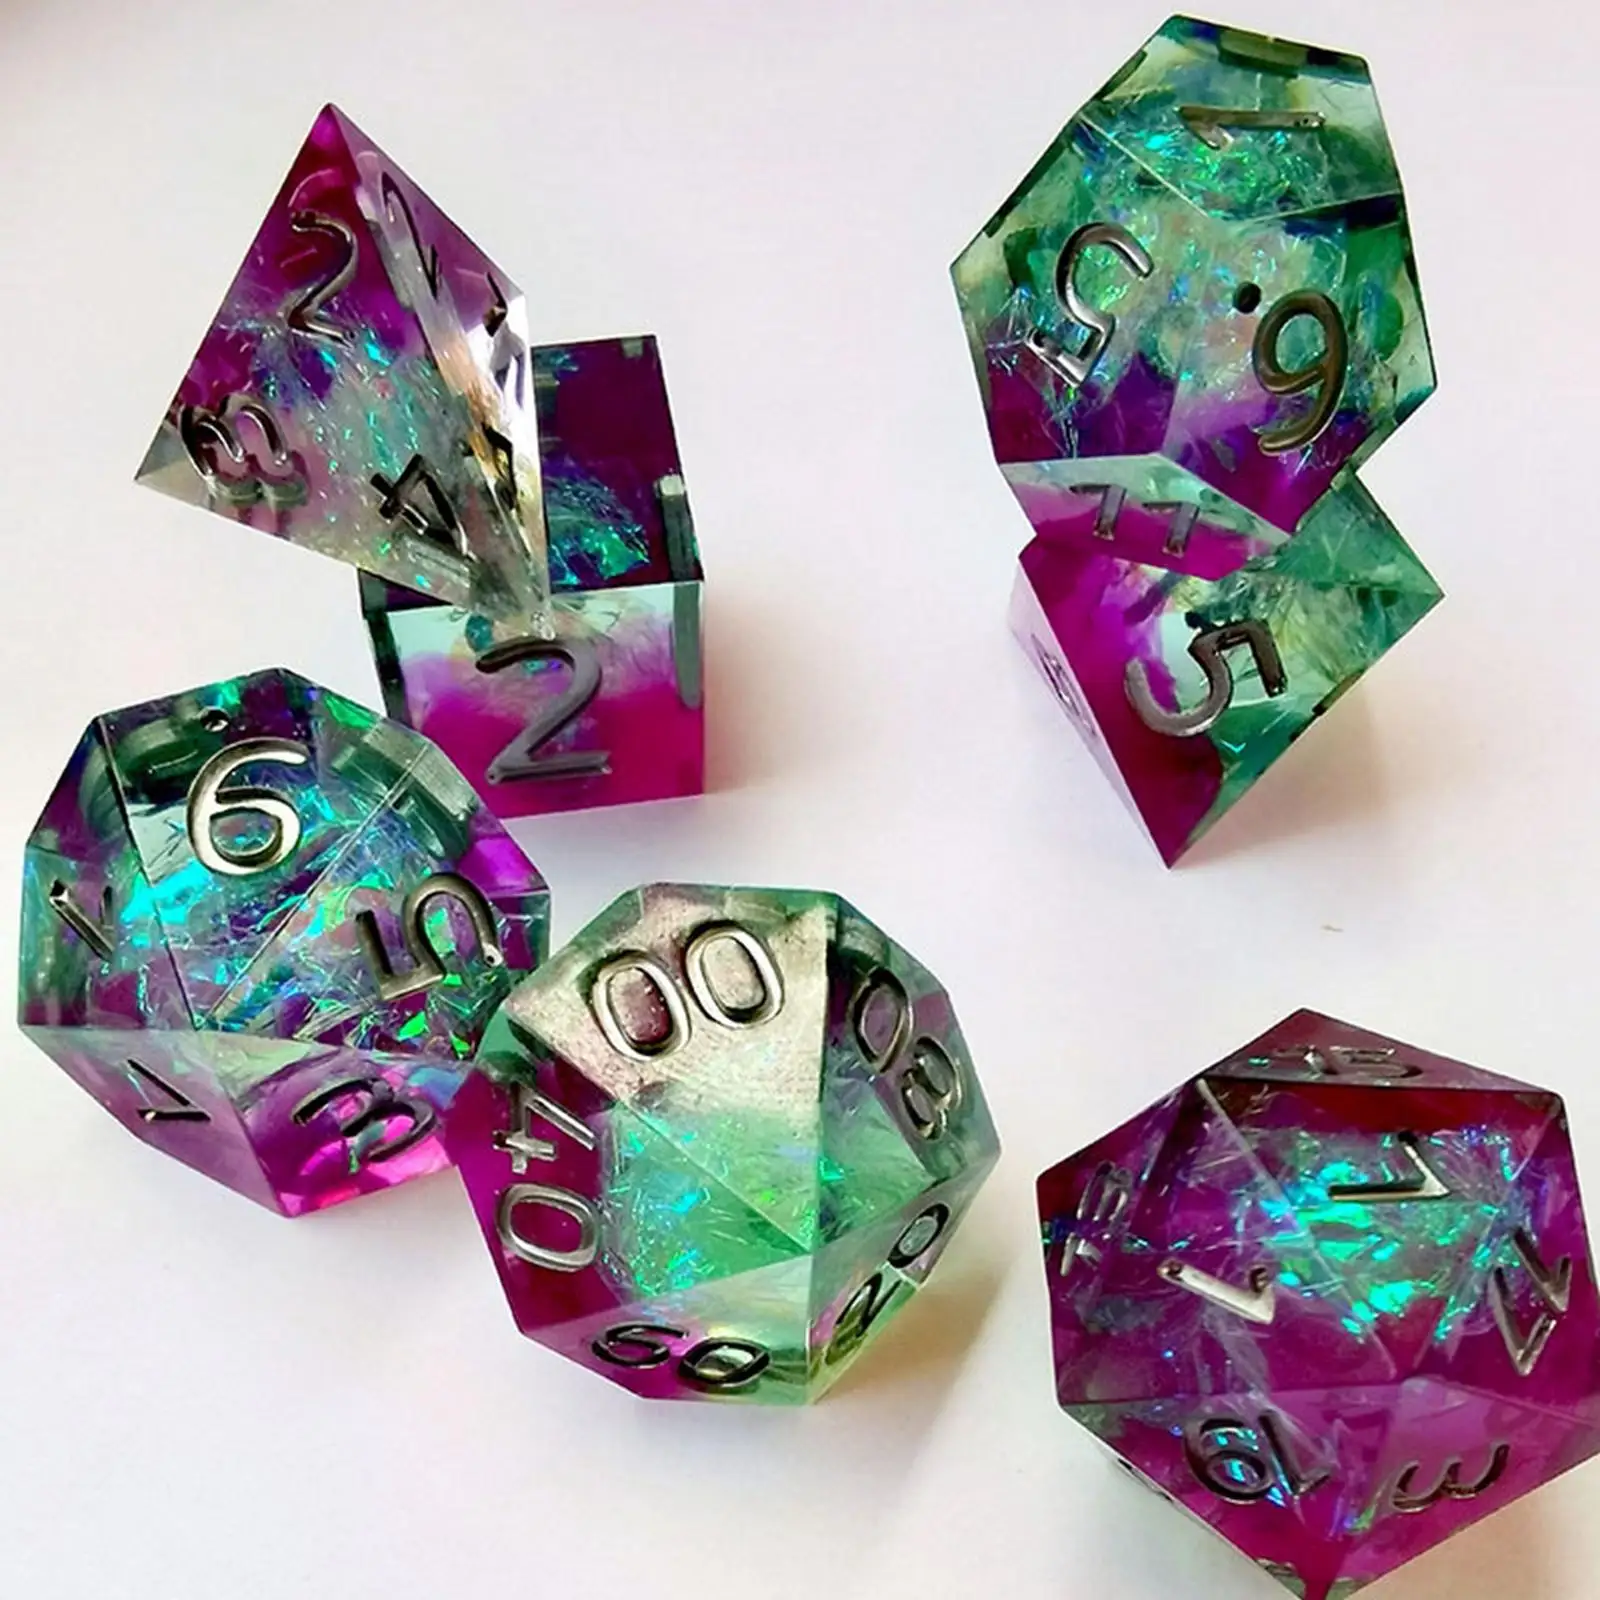 

Polyhedral Dice D4 D6 D8 2XD10 D12 D20 with Sharp Edges Beautiful Inclusions for